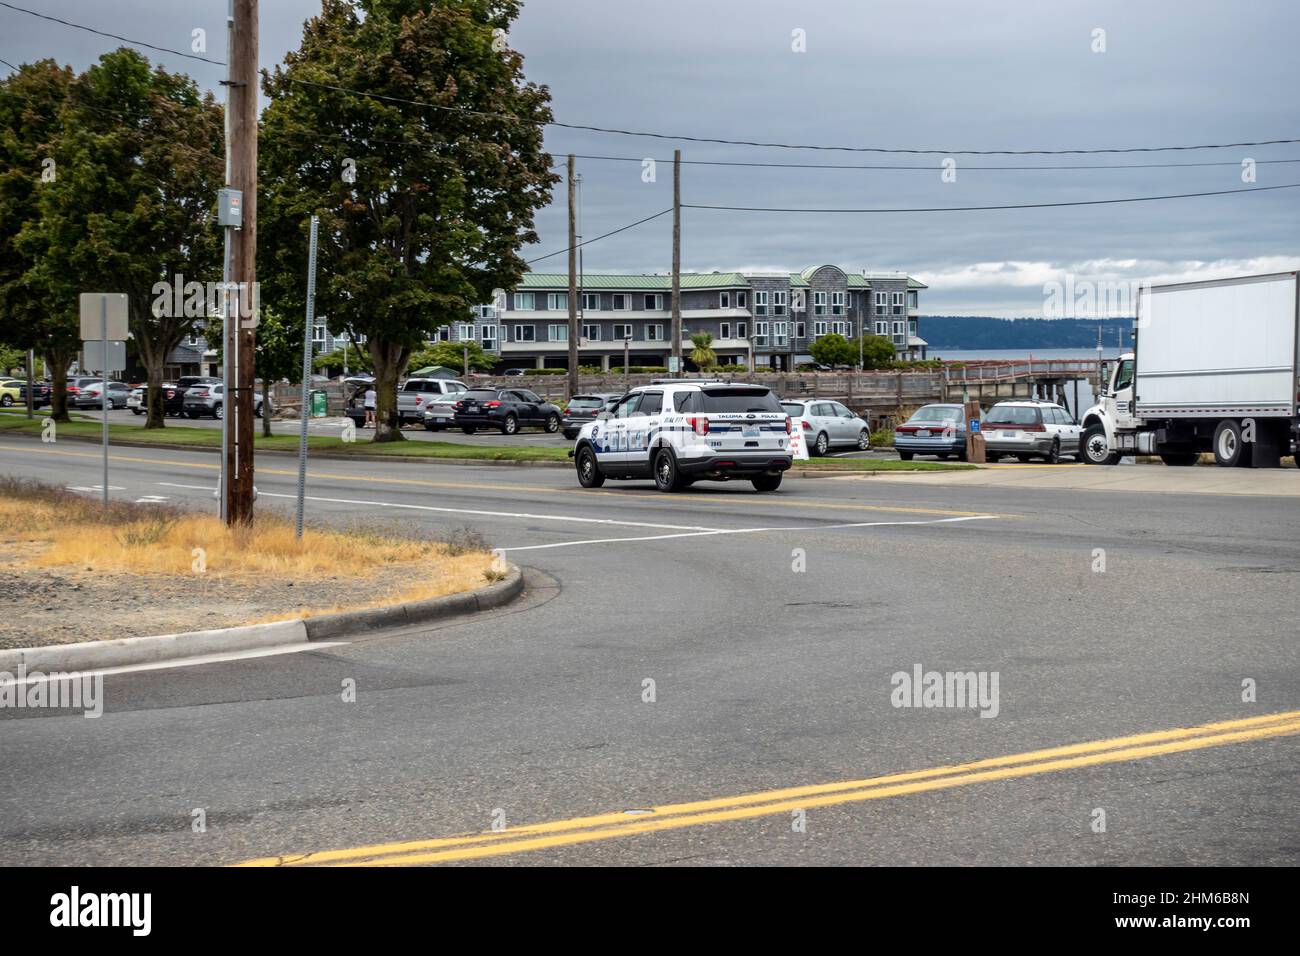 Tacoma, WA USA - circa August 2021: Street view of a Tacoma police SUV making its patrols in the Old Town area on an overcast day. Stock Photo